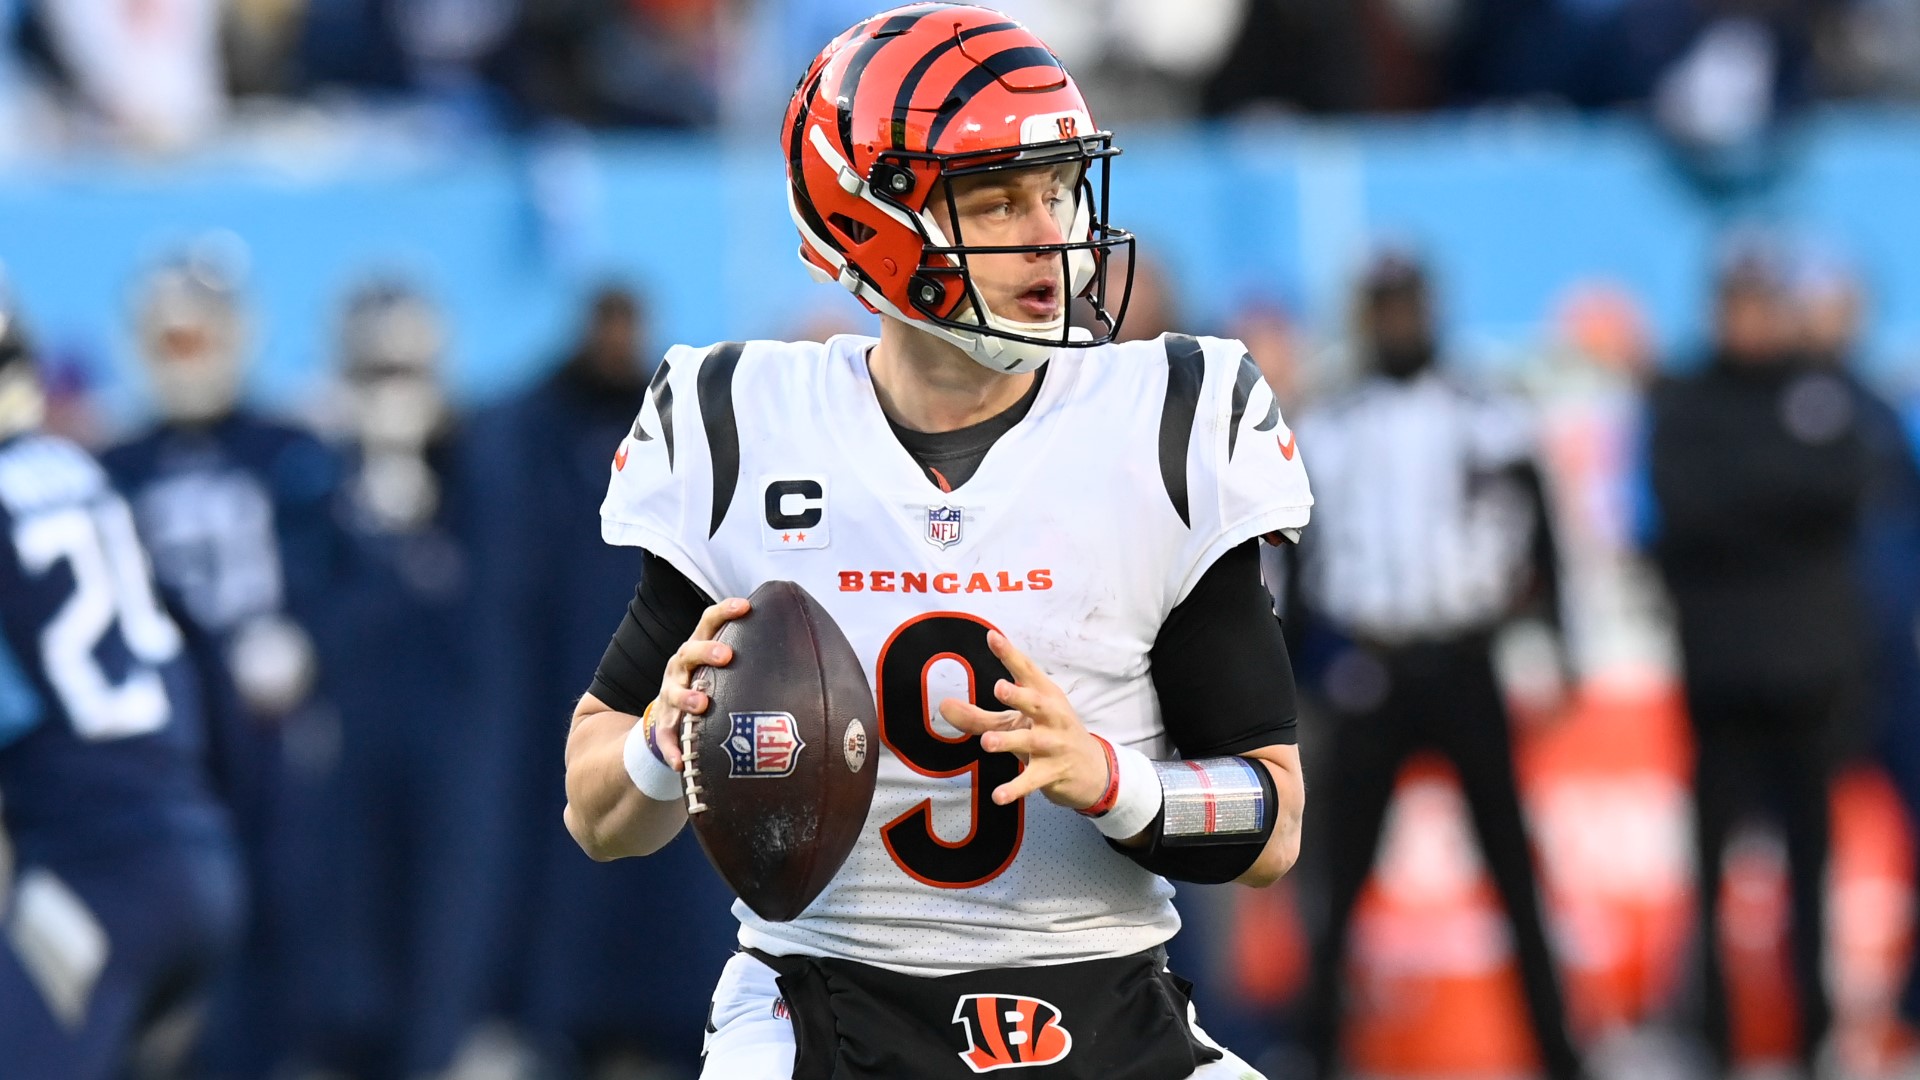 While some are surprised by the Bengals' playoff run, Jim Burrow said this was his son's expectation going into the season.